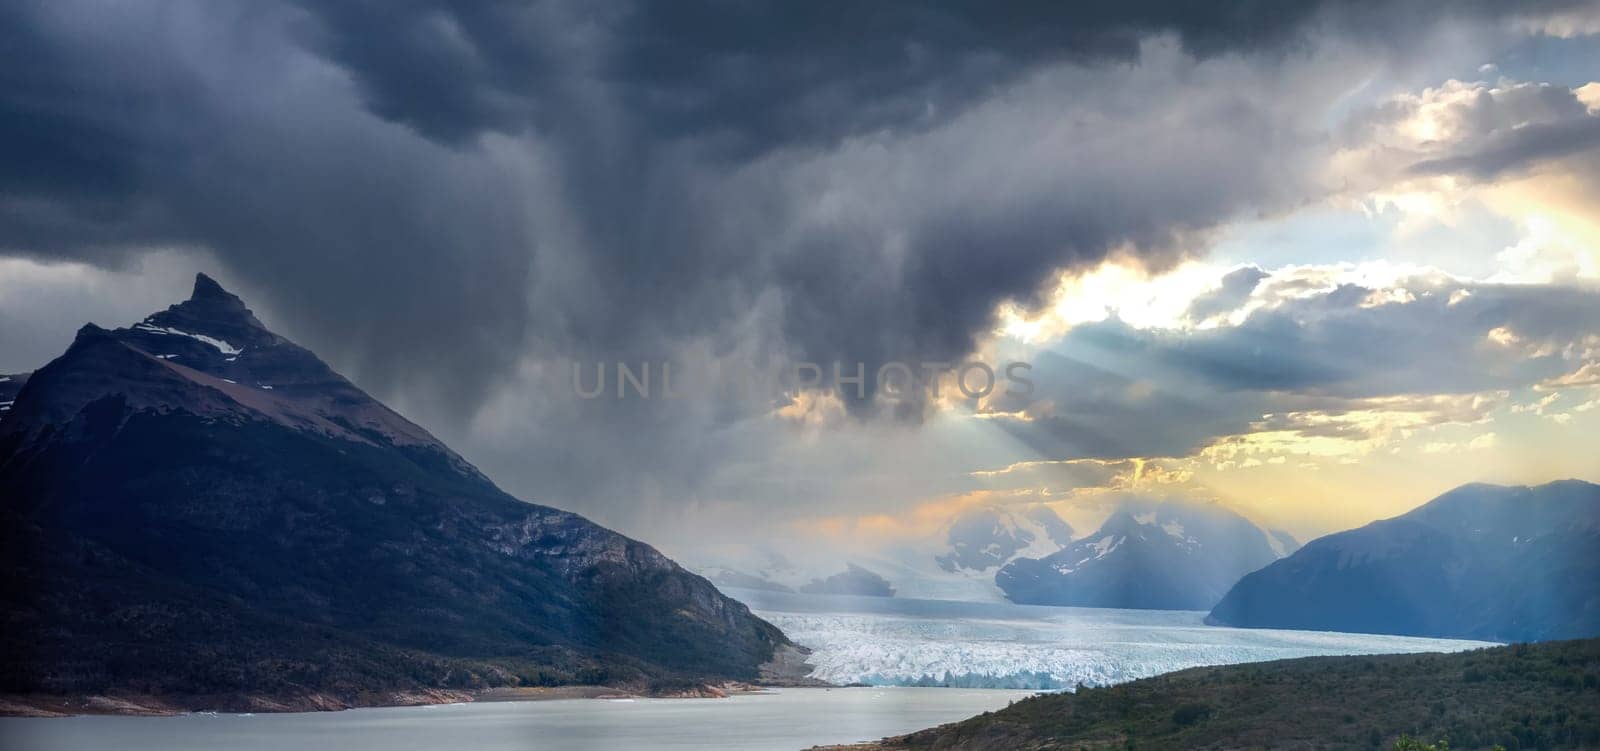 Dramatic glacier view with a mountain and dark clouds parting for sunlight.